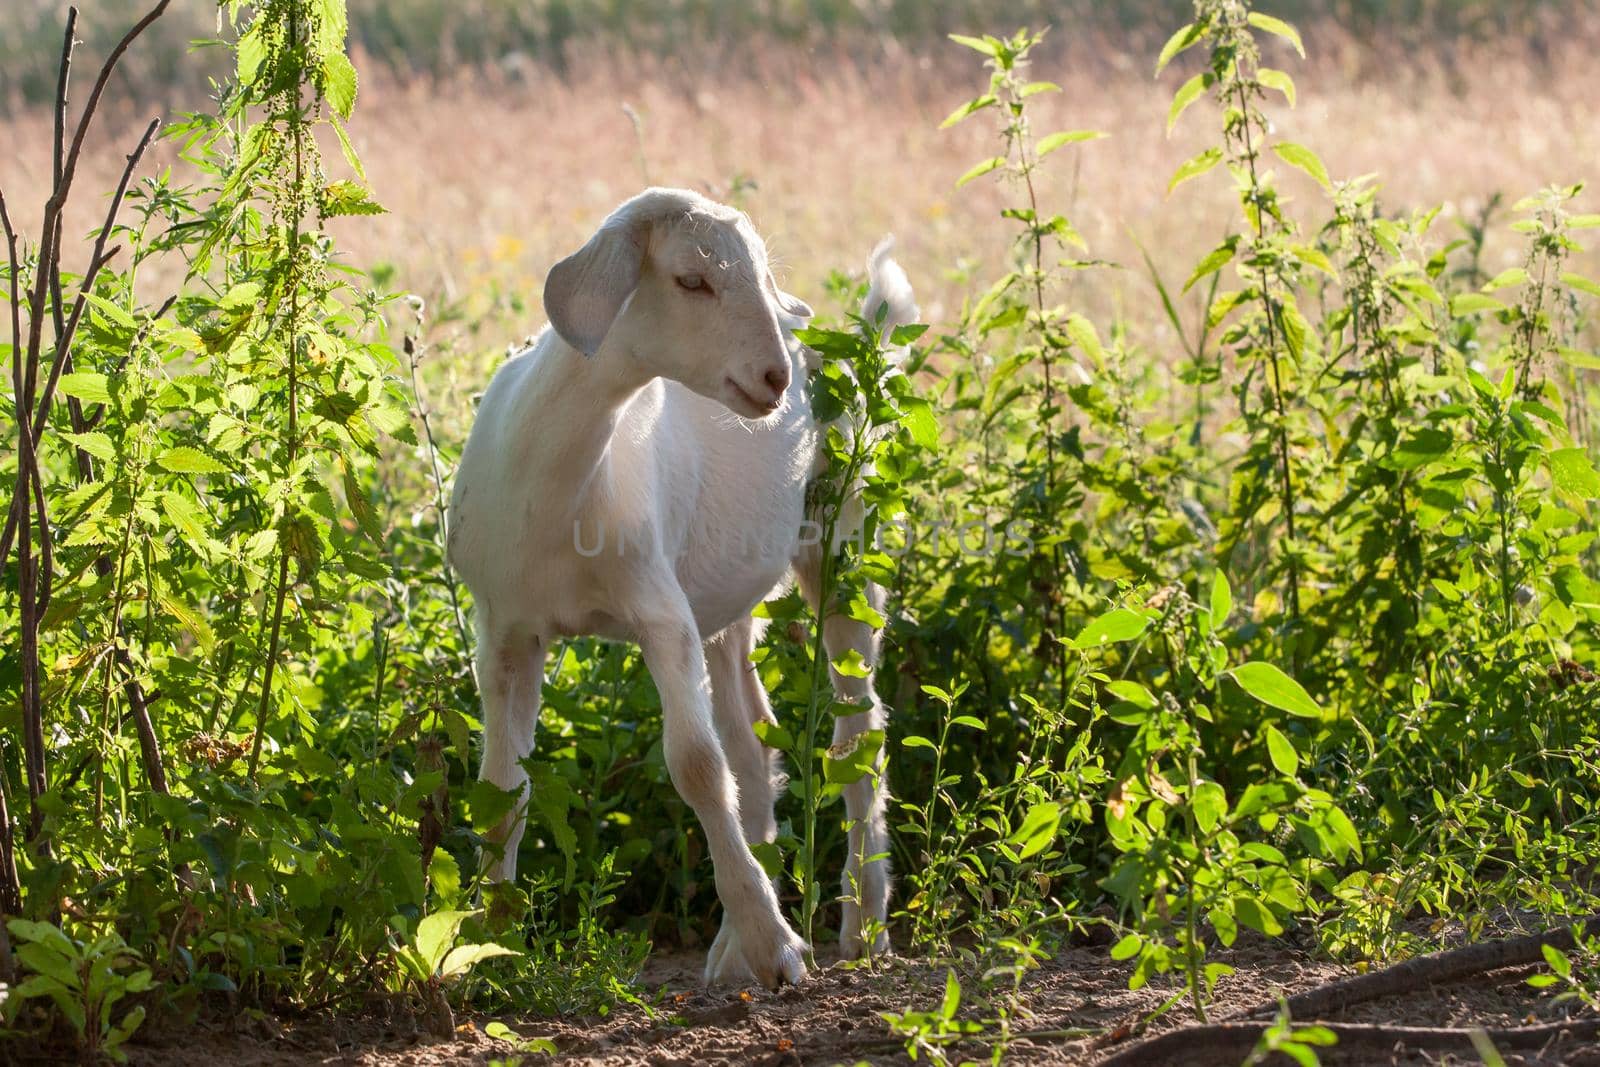 White nubian young goat and shining green nettles plants